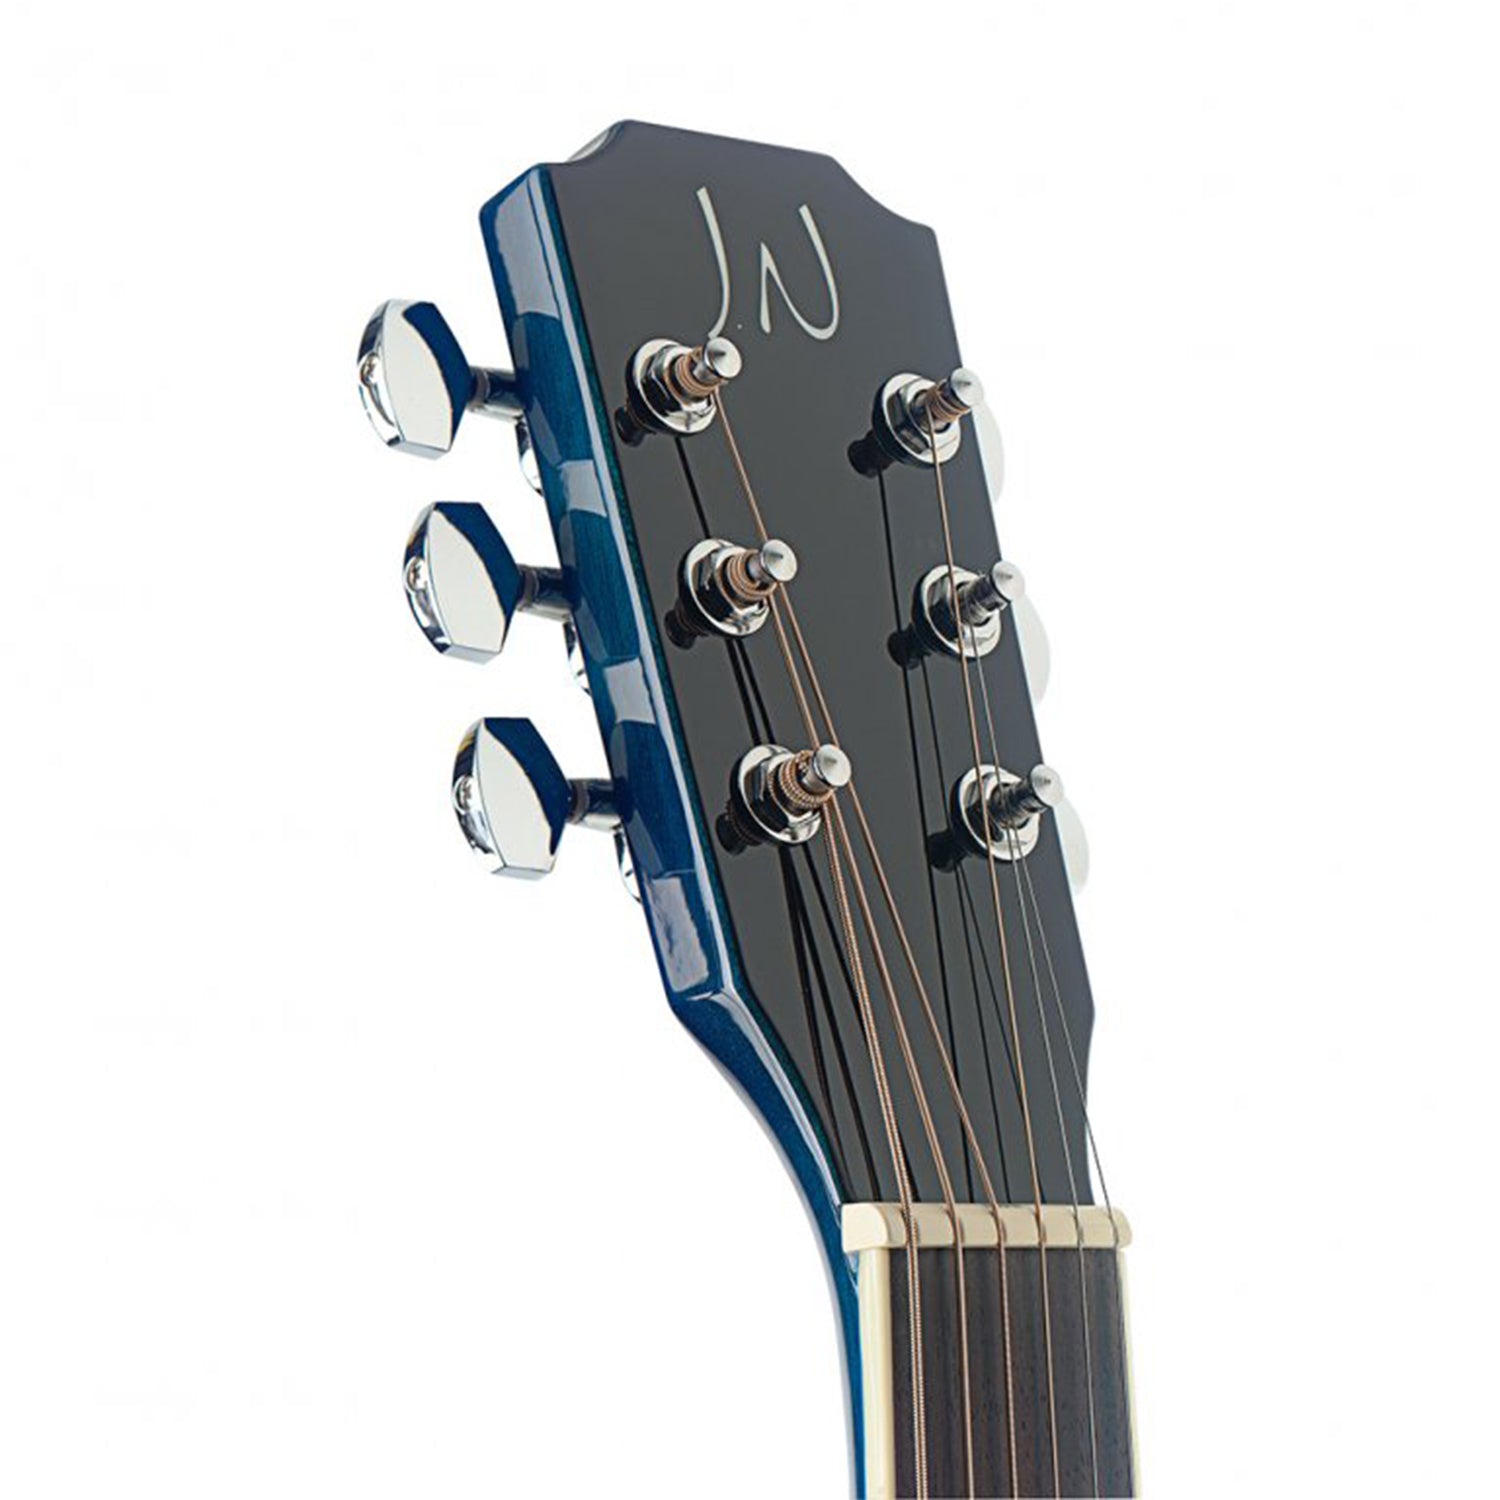 J.N Guitars BES-A TBB Transparent Blueburst Acoustic Auditorium Guitar with Solid Spruce Top, Bessie series